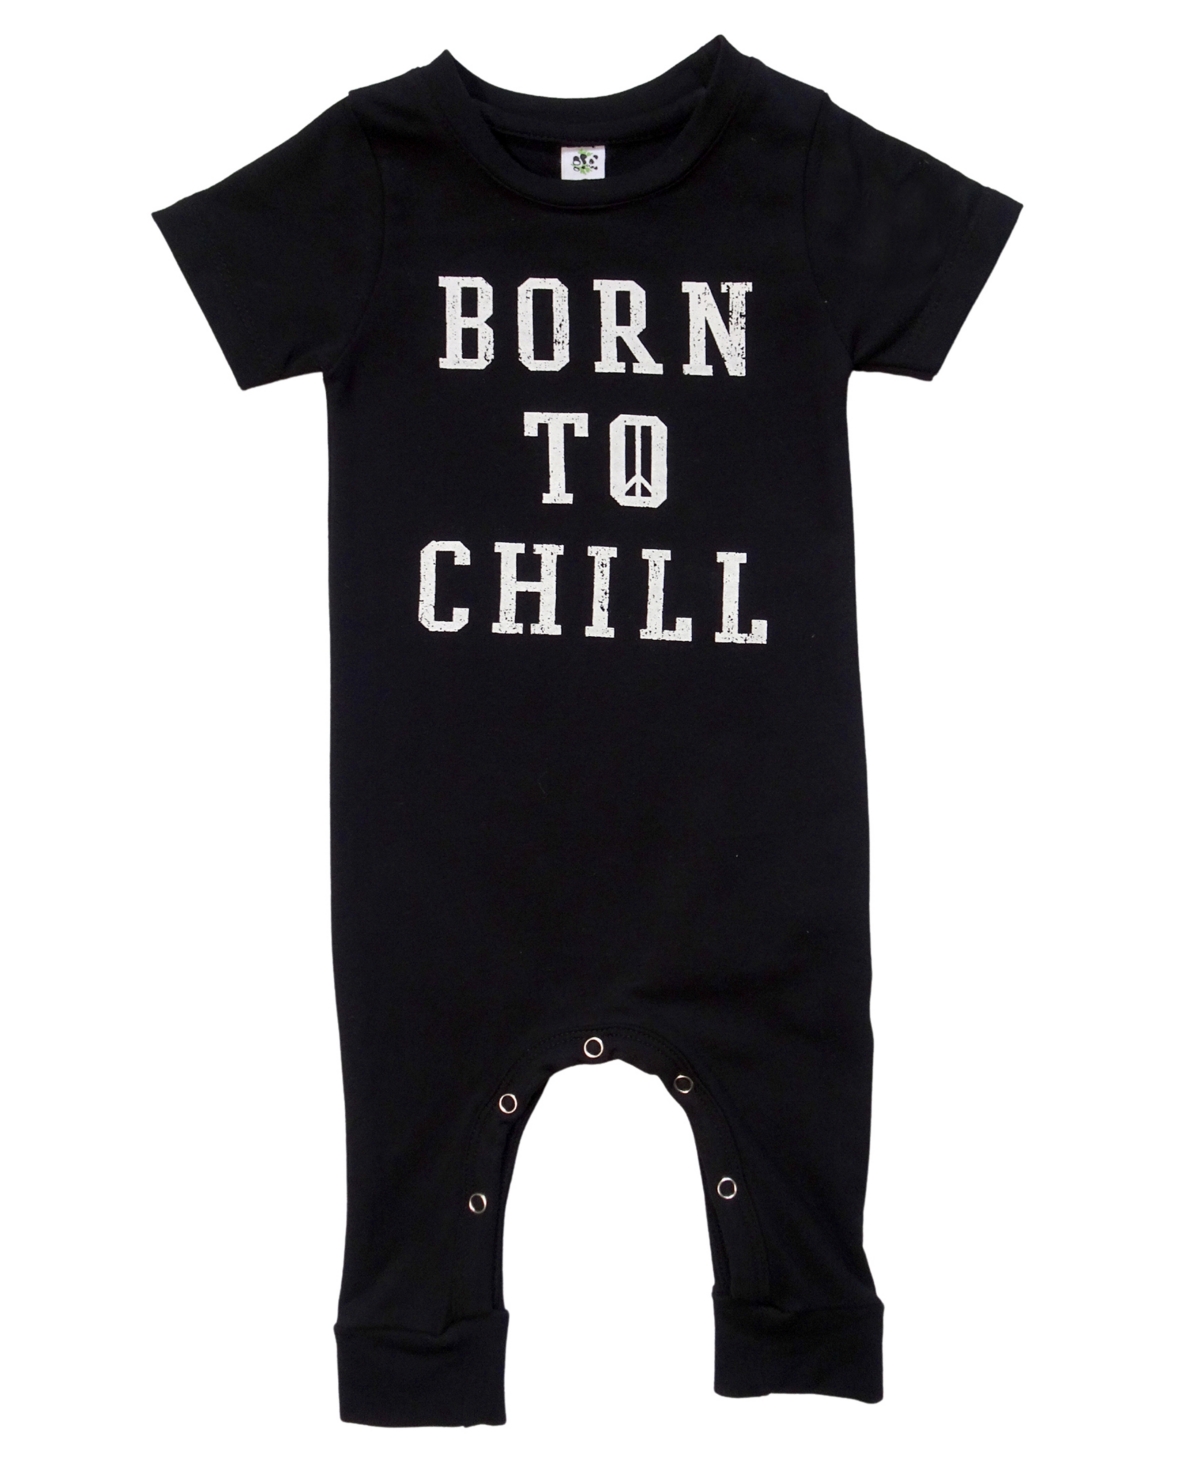 Earth Baby Outfitters Baby Boys Or Baby Girls Short Sleeve Romper In Black,chill